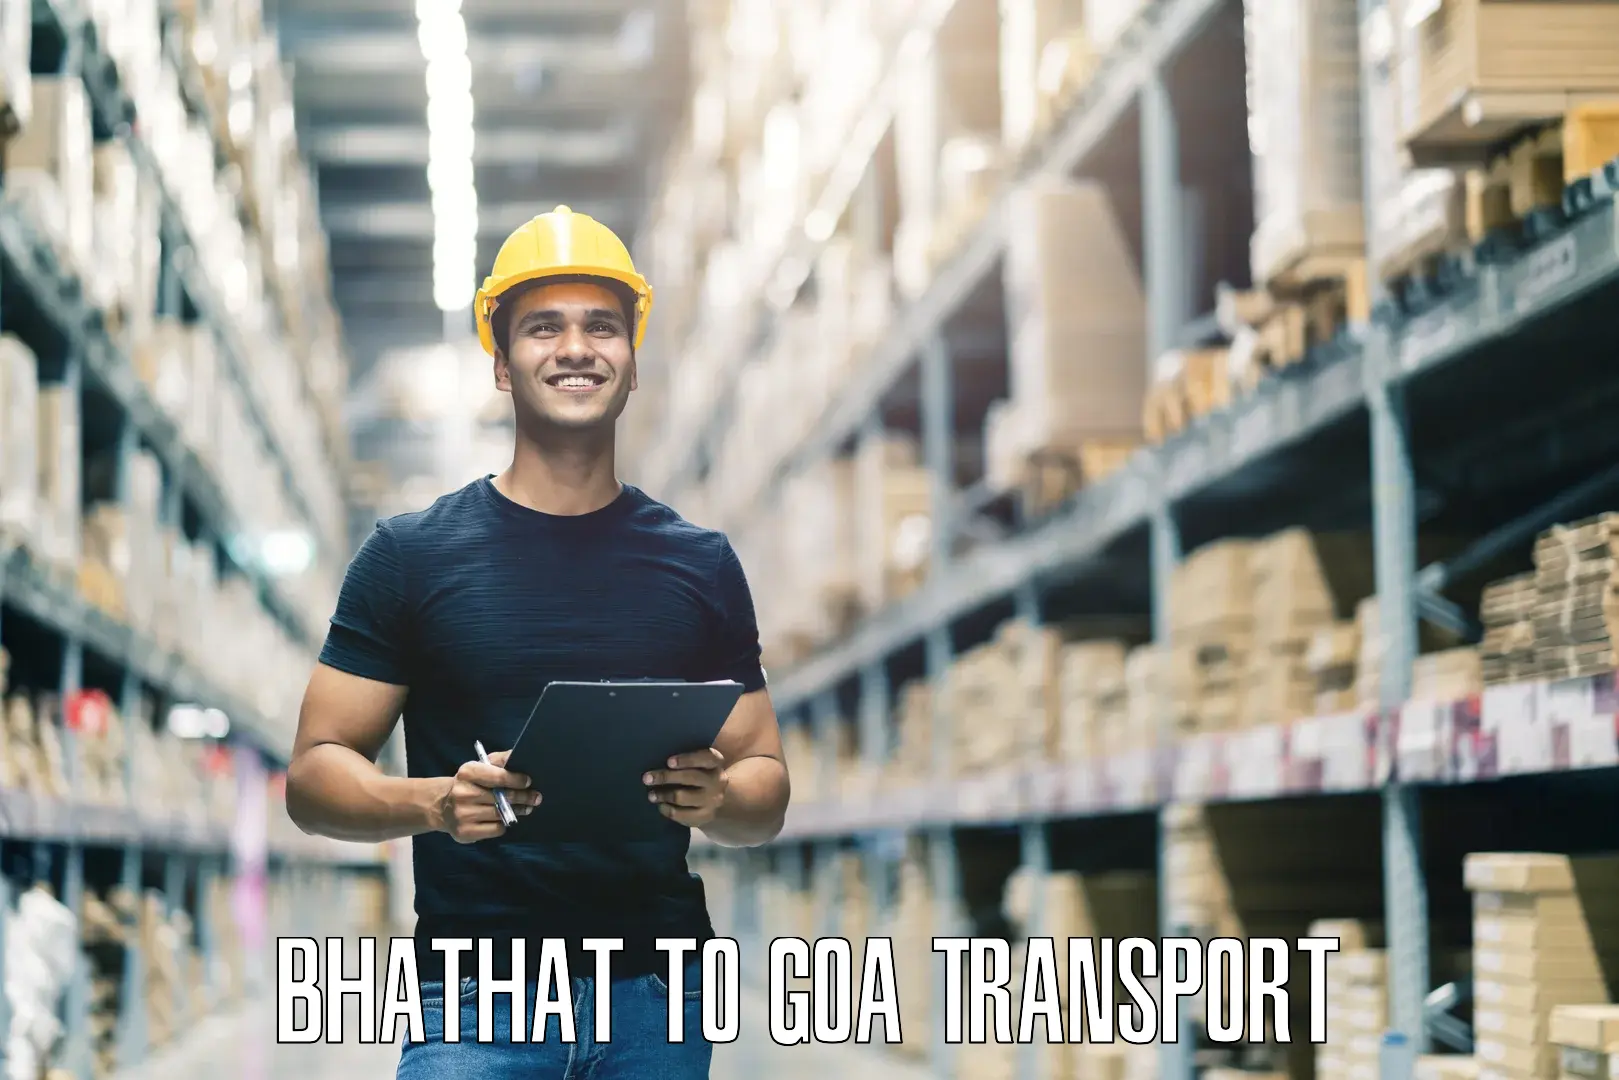 Transport in sharing Bhathat to Goa